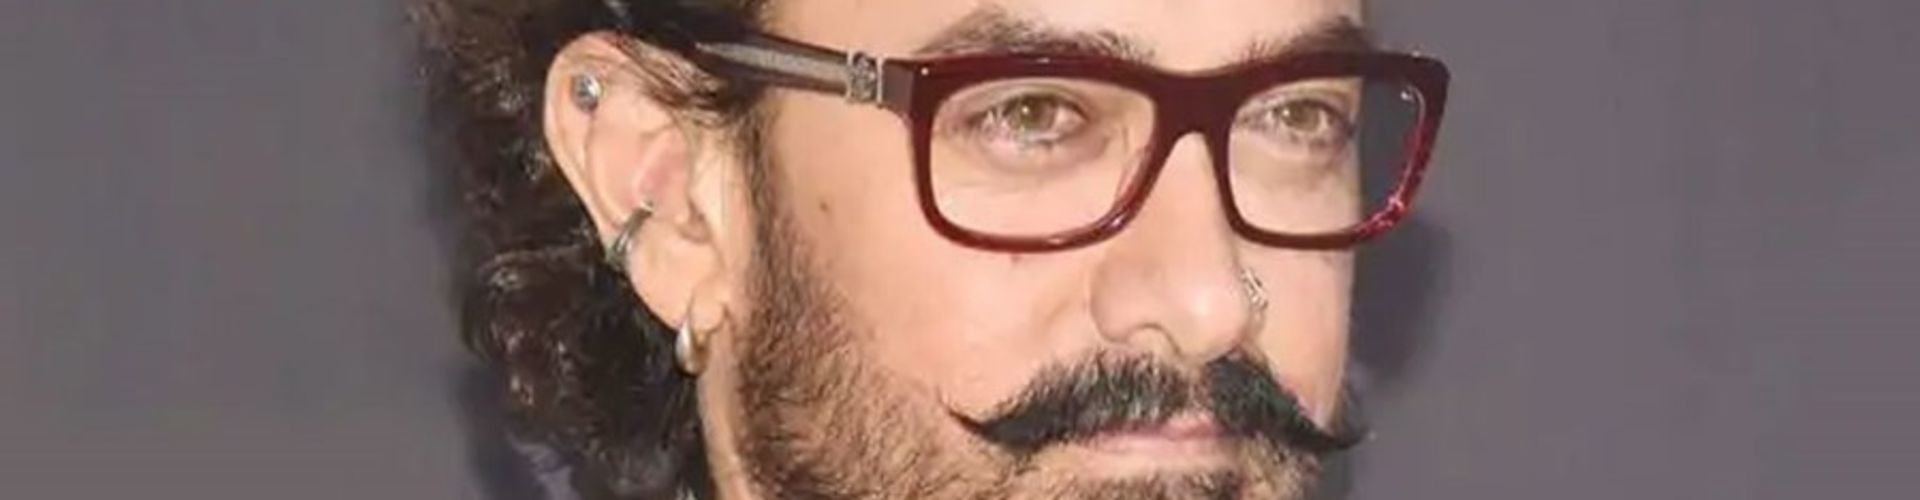 Without Good Script, There Is No Film Says Aamir Khan